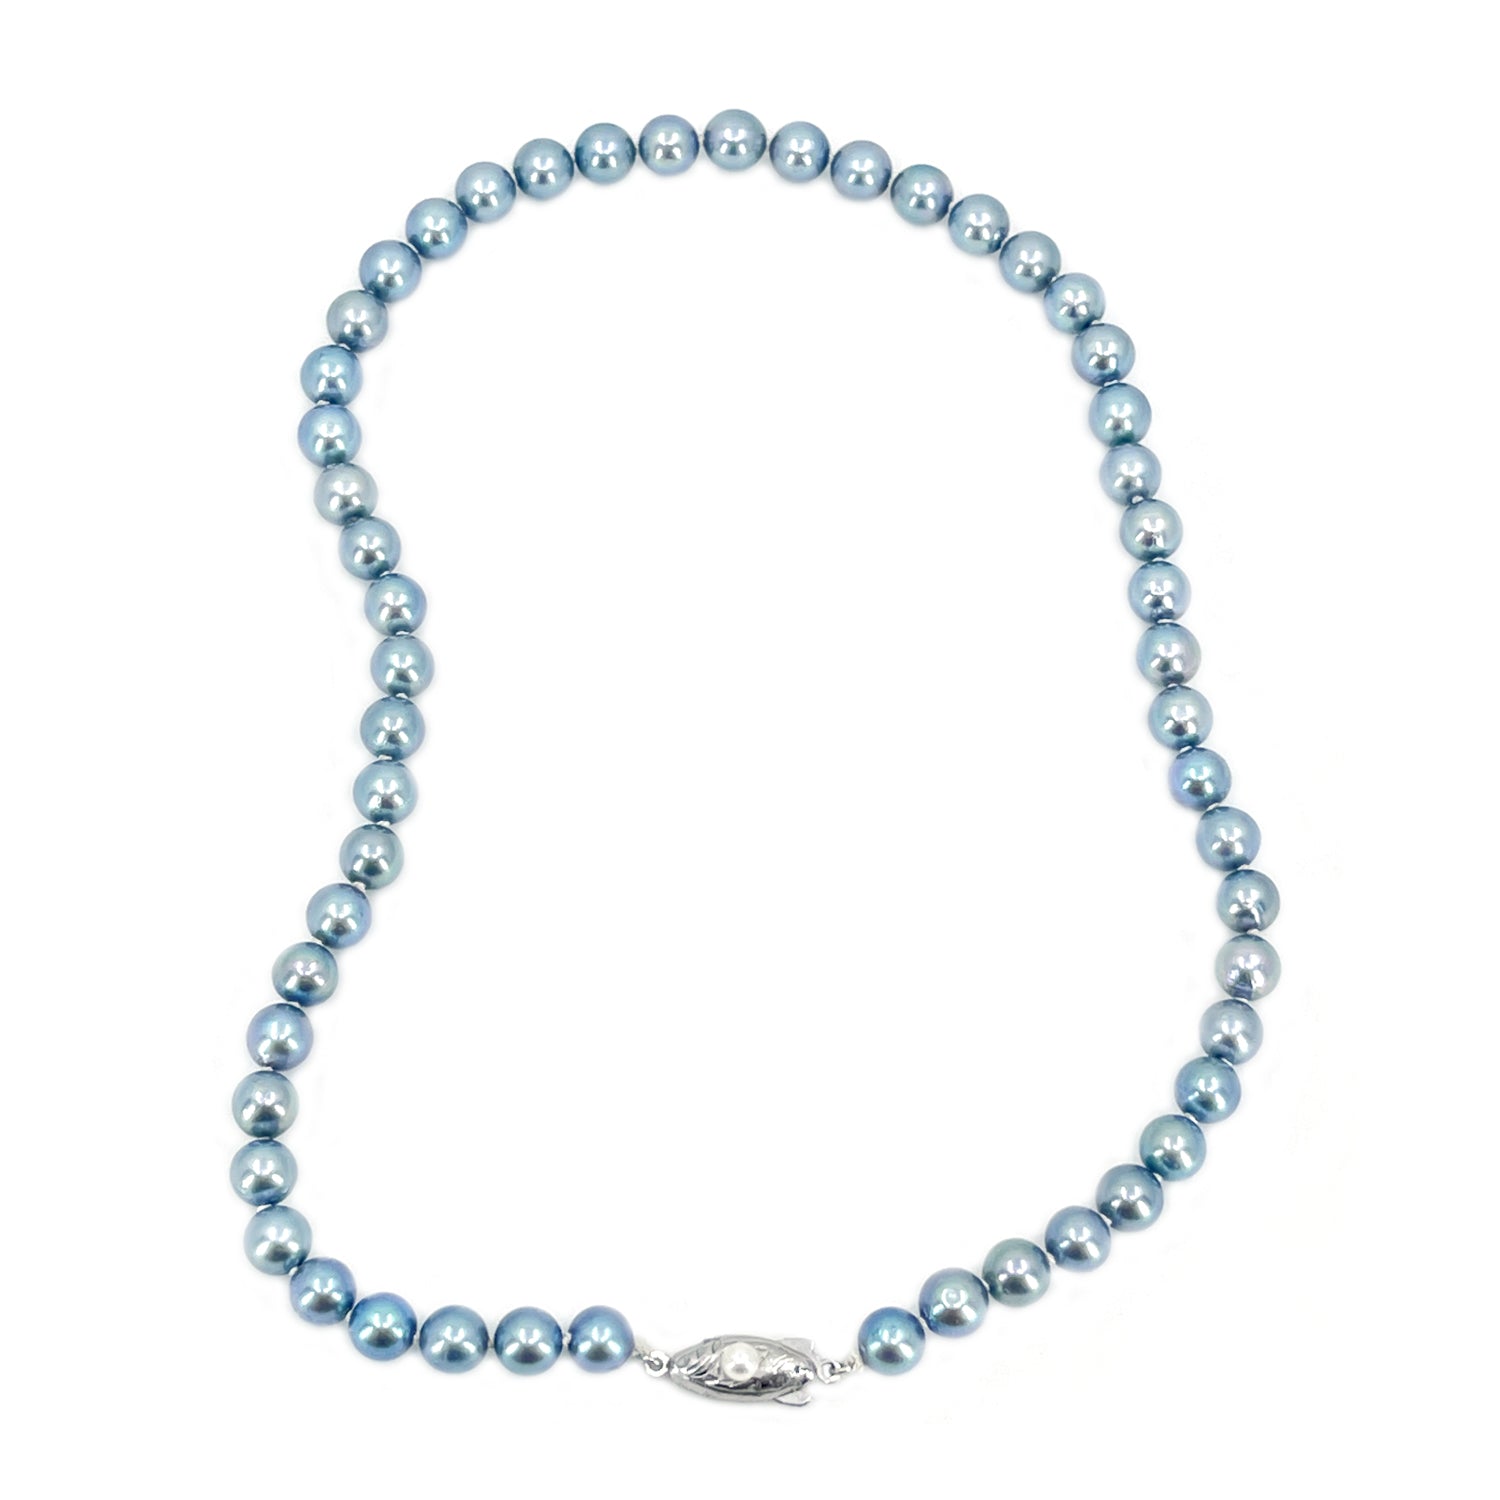 Blue Japanese Saltwater Cultured Akoya Pearl Vintage Necklace Choker - Sterling Silver 15.75 Inch